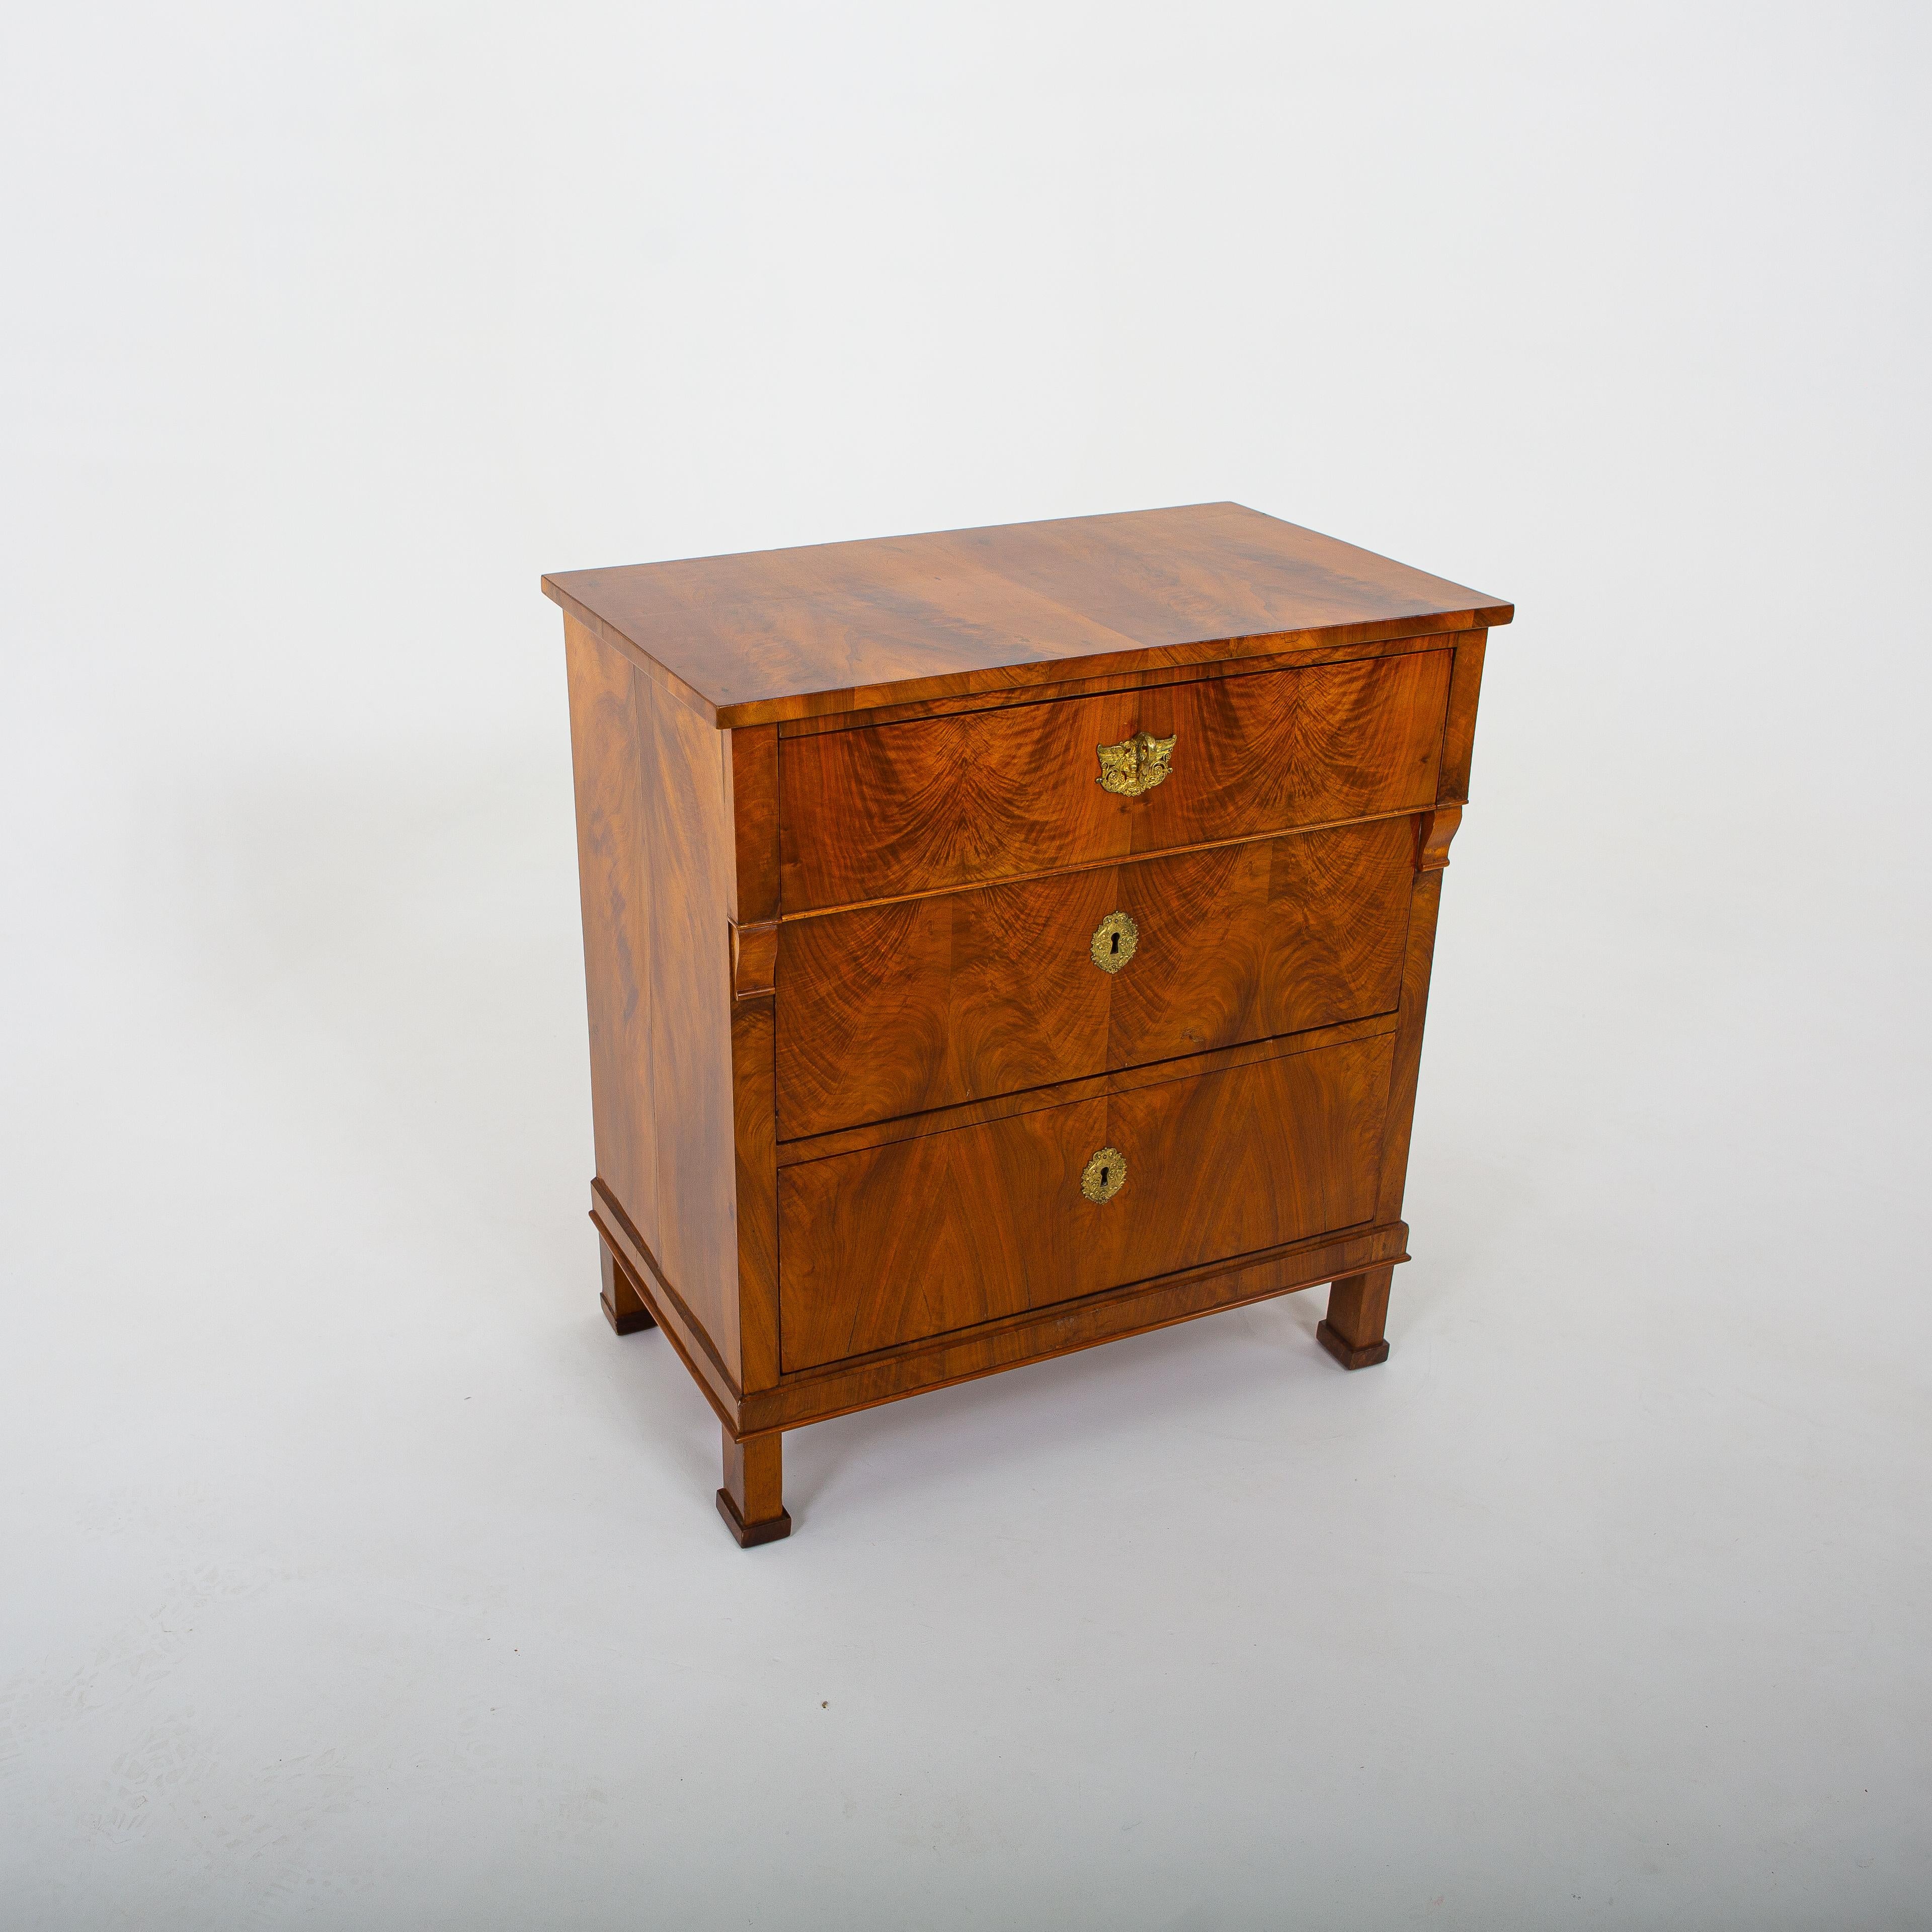 Biedermeier chest of drawers on square feet, veneered in walnut, with three drawers and gilded key escutcheons and fittings. The top drawer protrudes slightly and rests on small volutes.